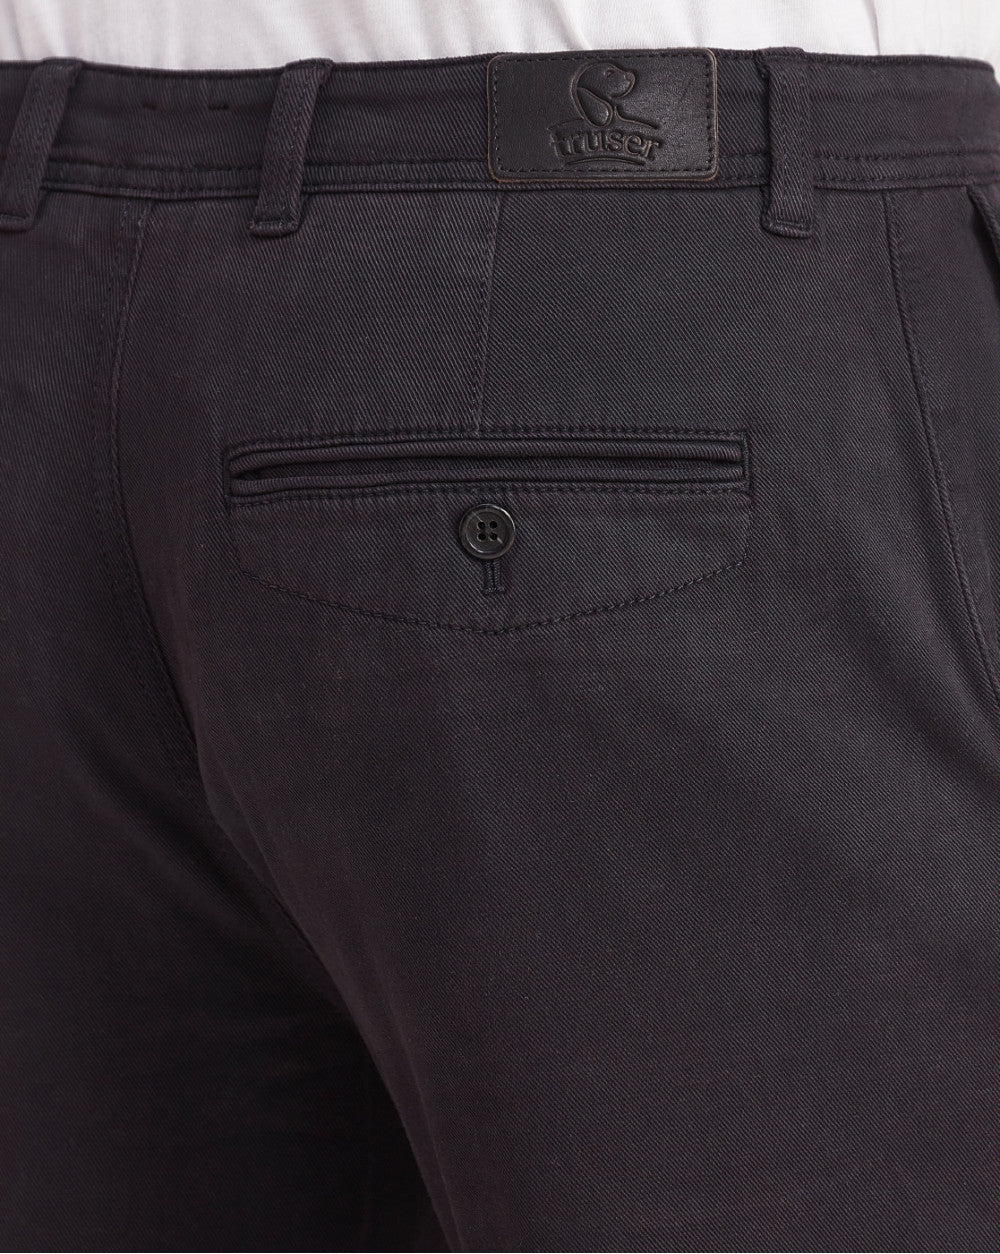 Tapered Fit Garment Dyed Chinos - Jet Black